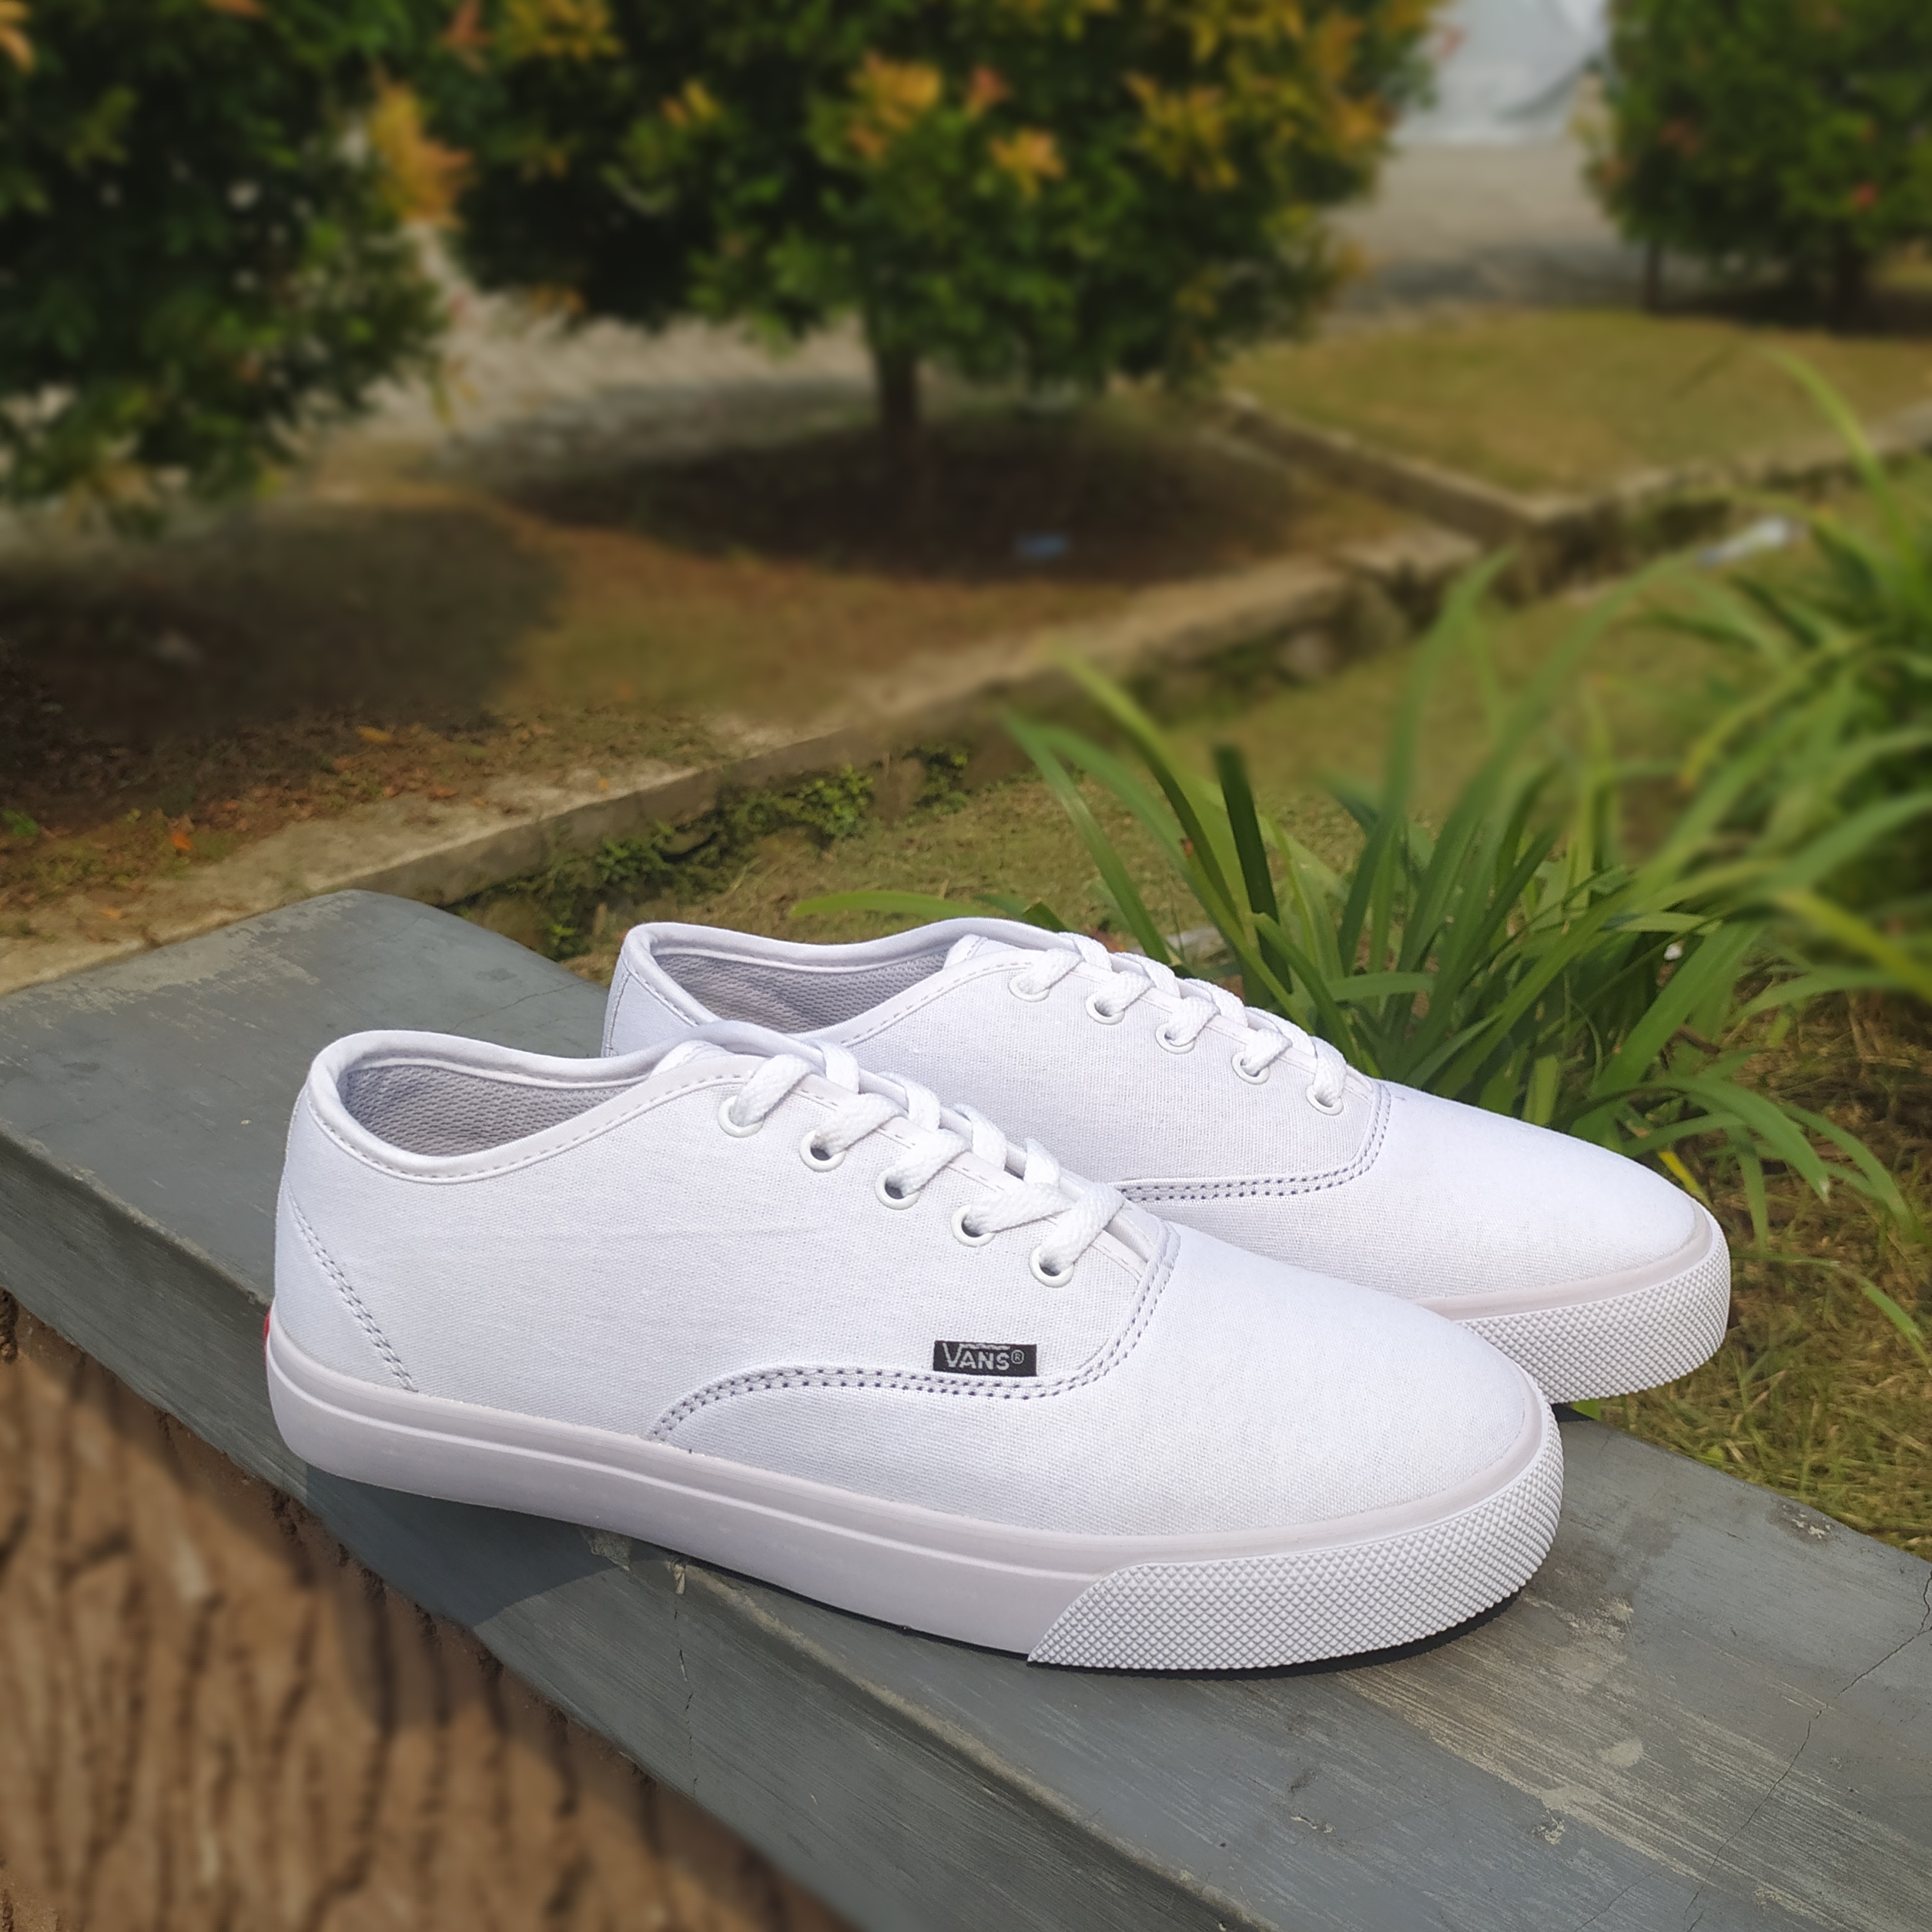 Vans Authentic Full White Outlet Store 